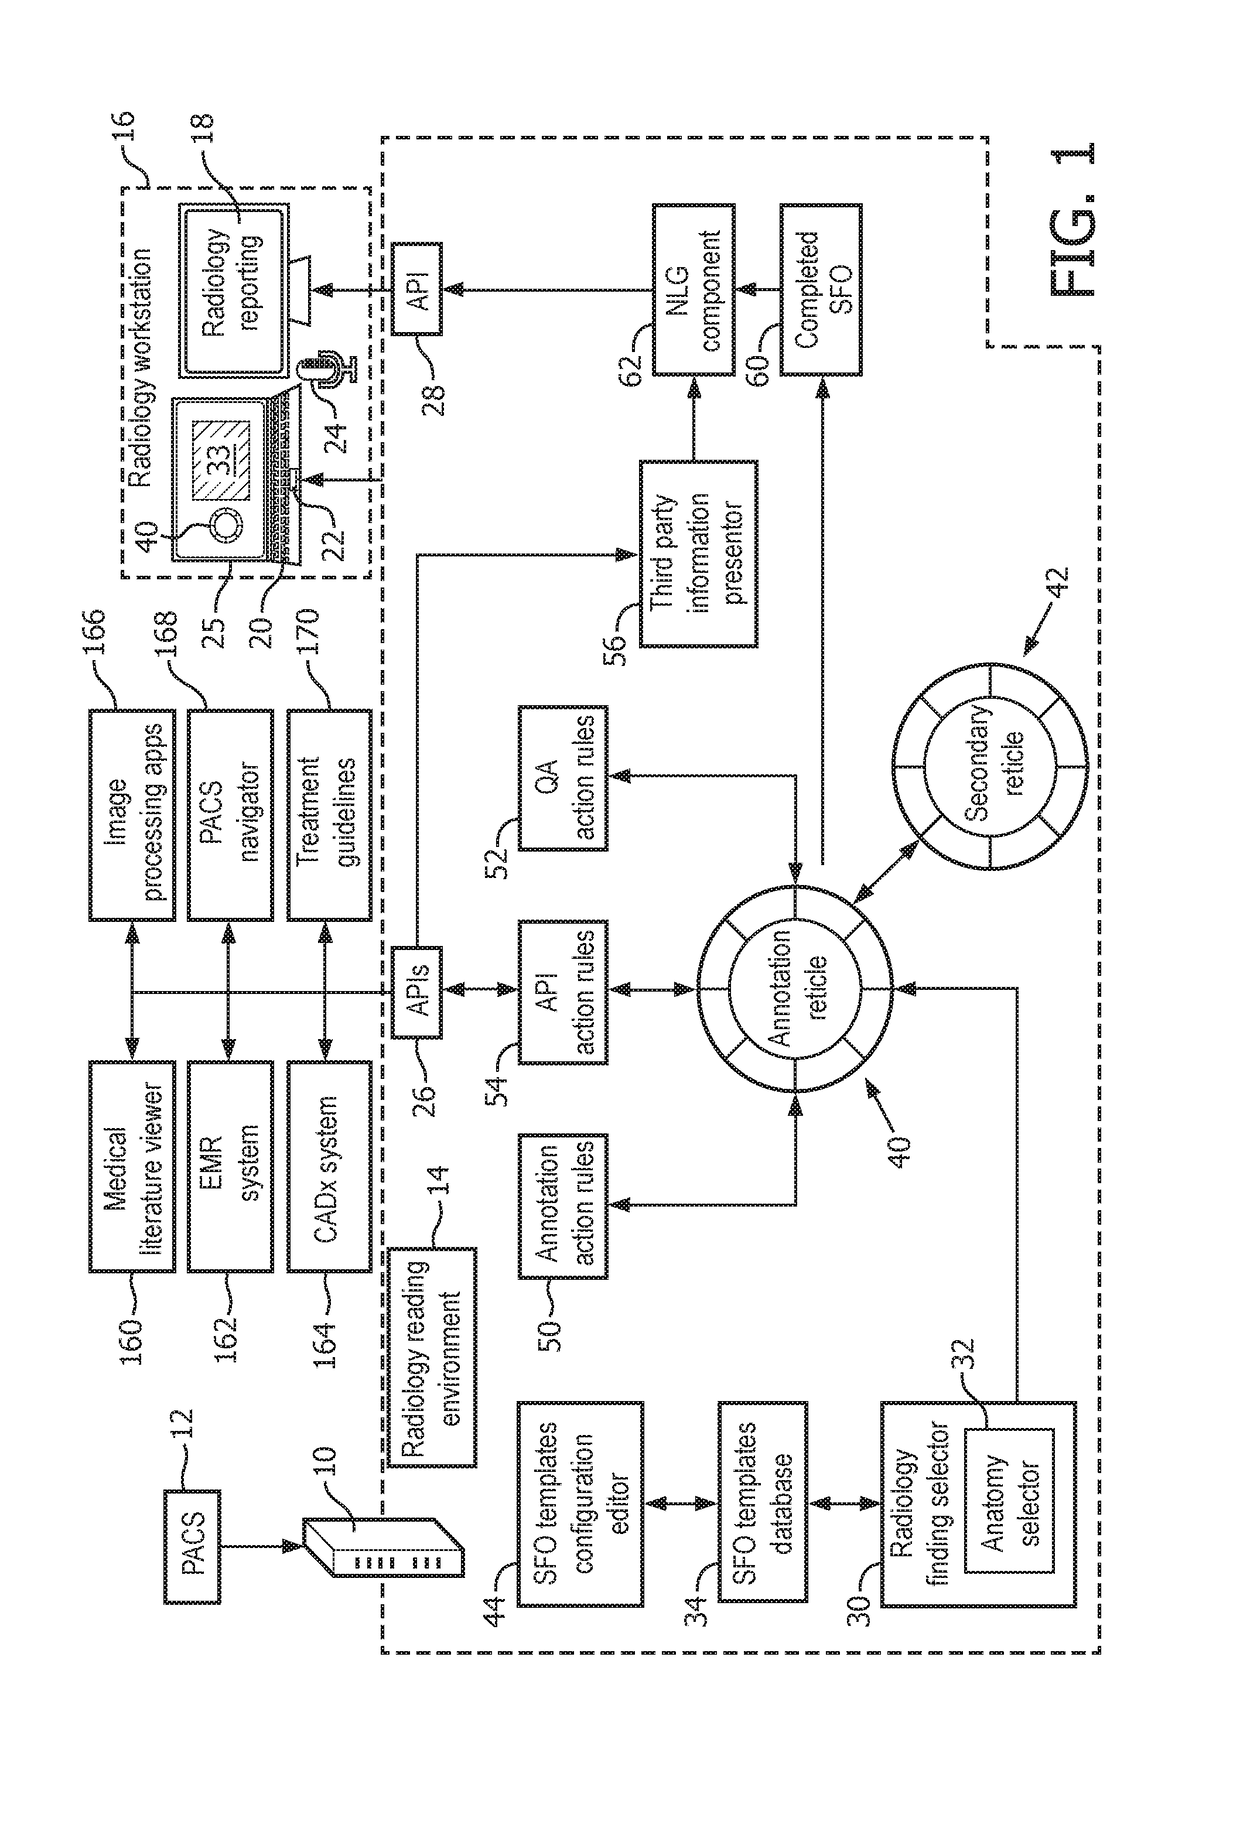 Structured finding objects for integration of third party applications in the image interpretation workflow